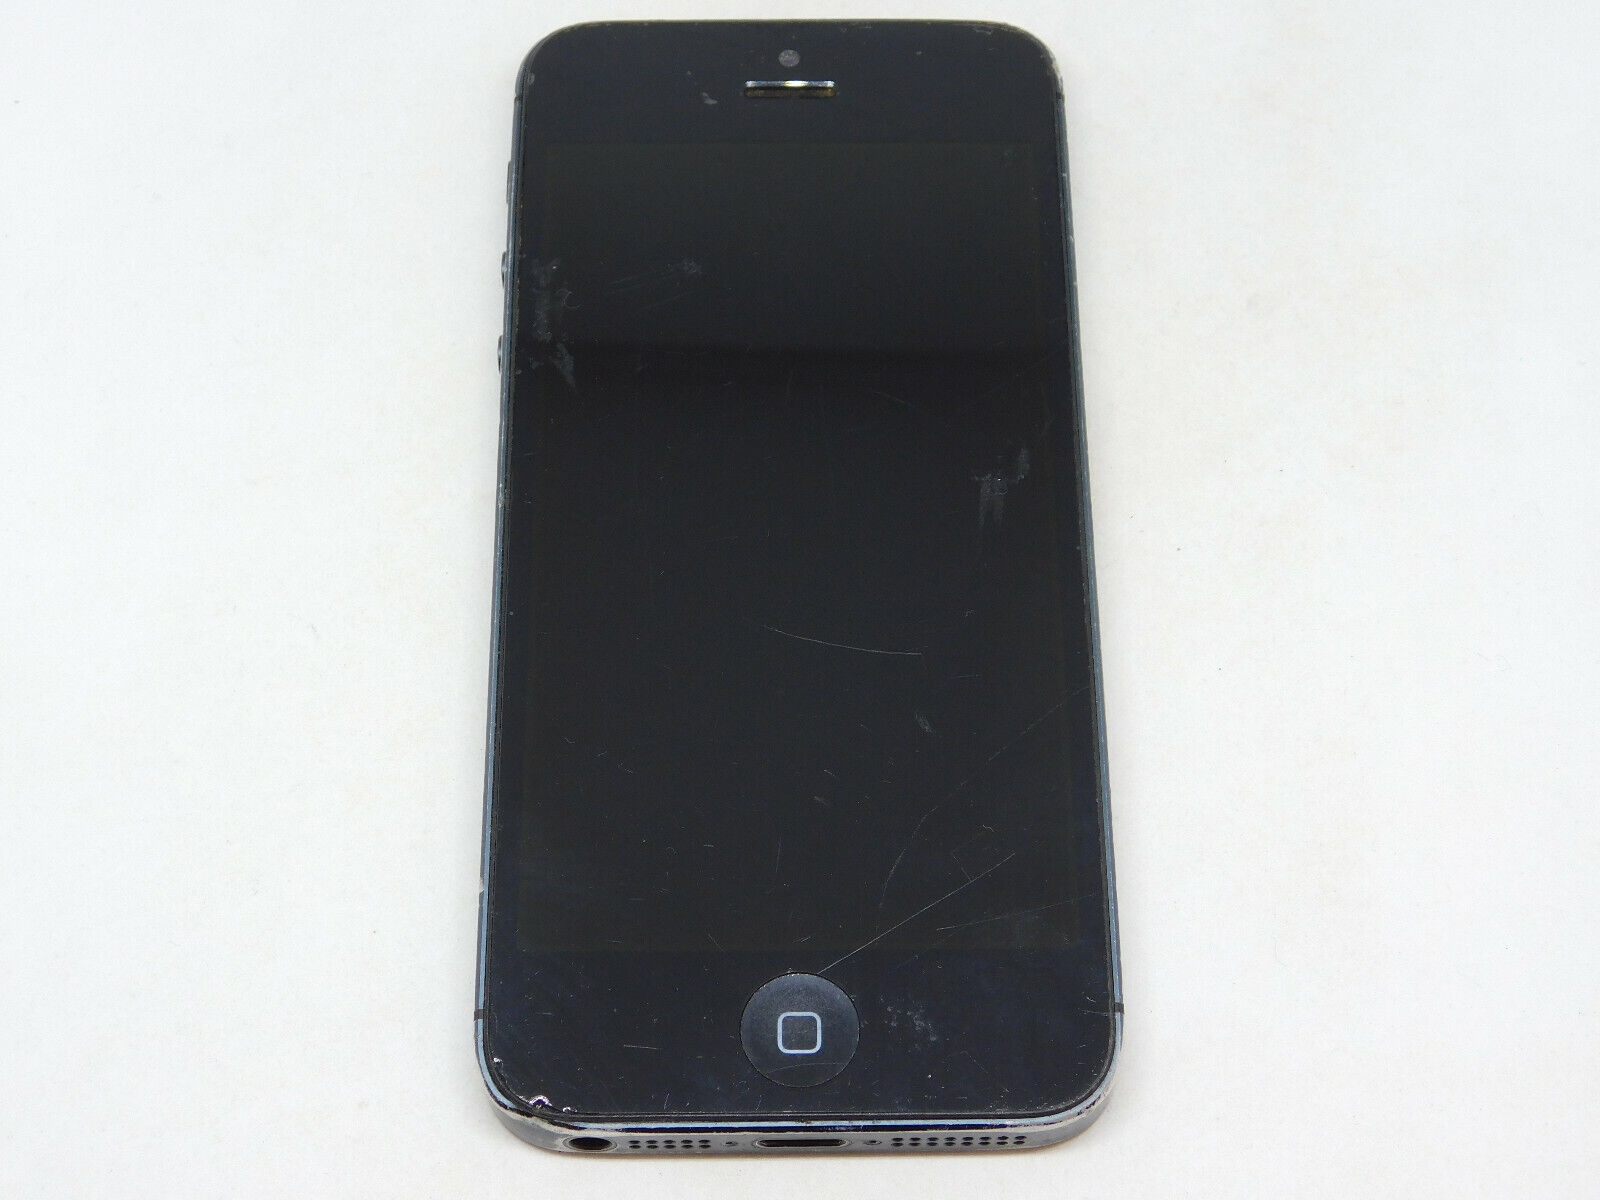 Apple iPhone 5 A1428 32GB Untested For Parts or Repairs Only